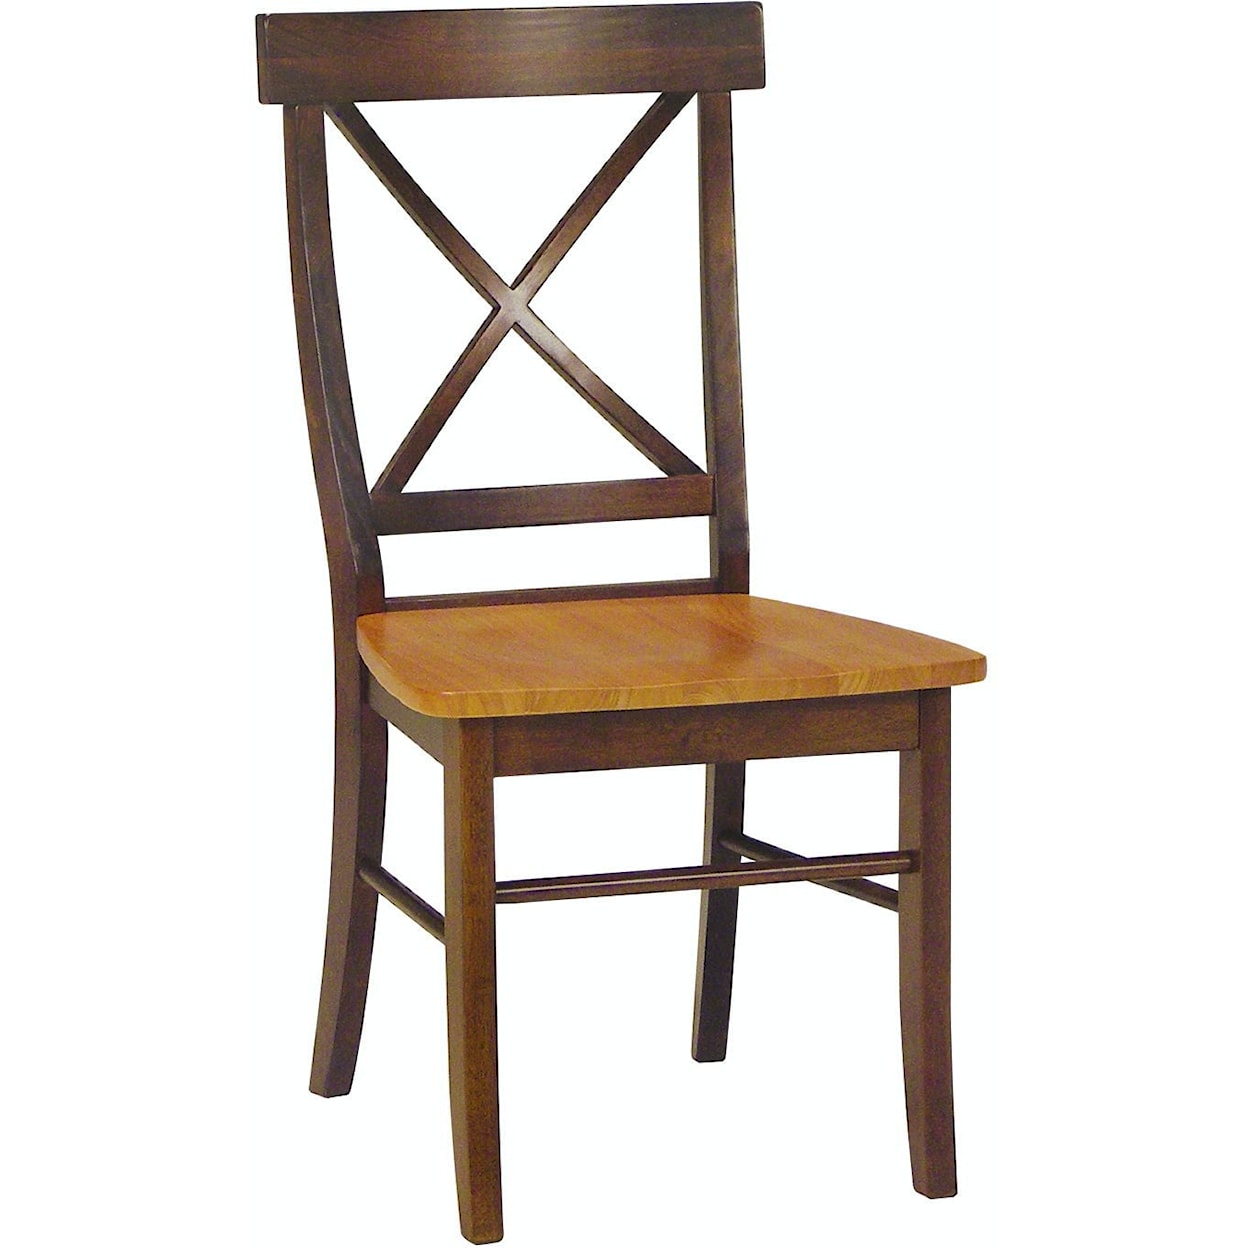 John Thomas Dining Essentials X-Back Dining Chair in Cinnamon / Expresso